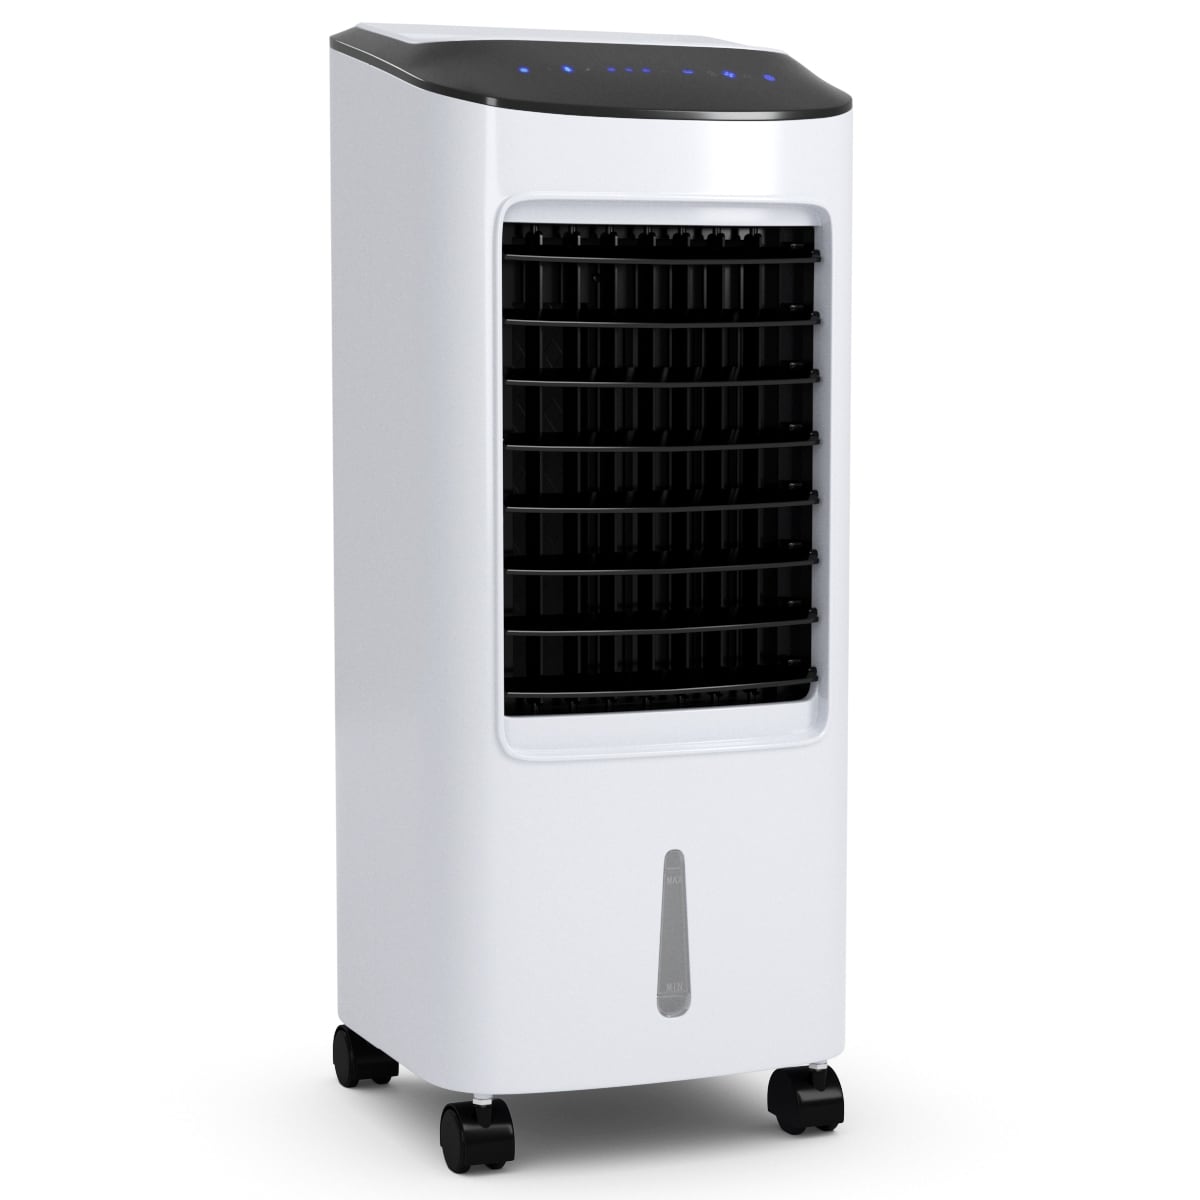 Purifier 3 in 1 Or Similar Portable Air Conditioner,Air Cooler Fan,Humidifier 